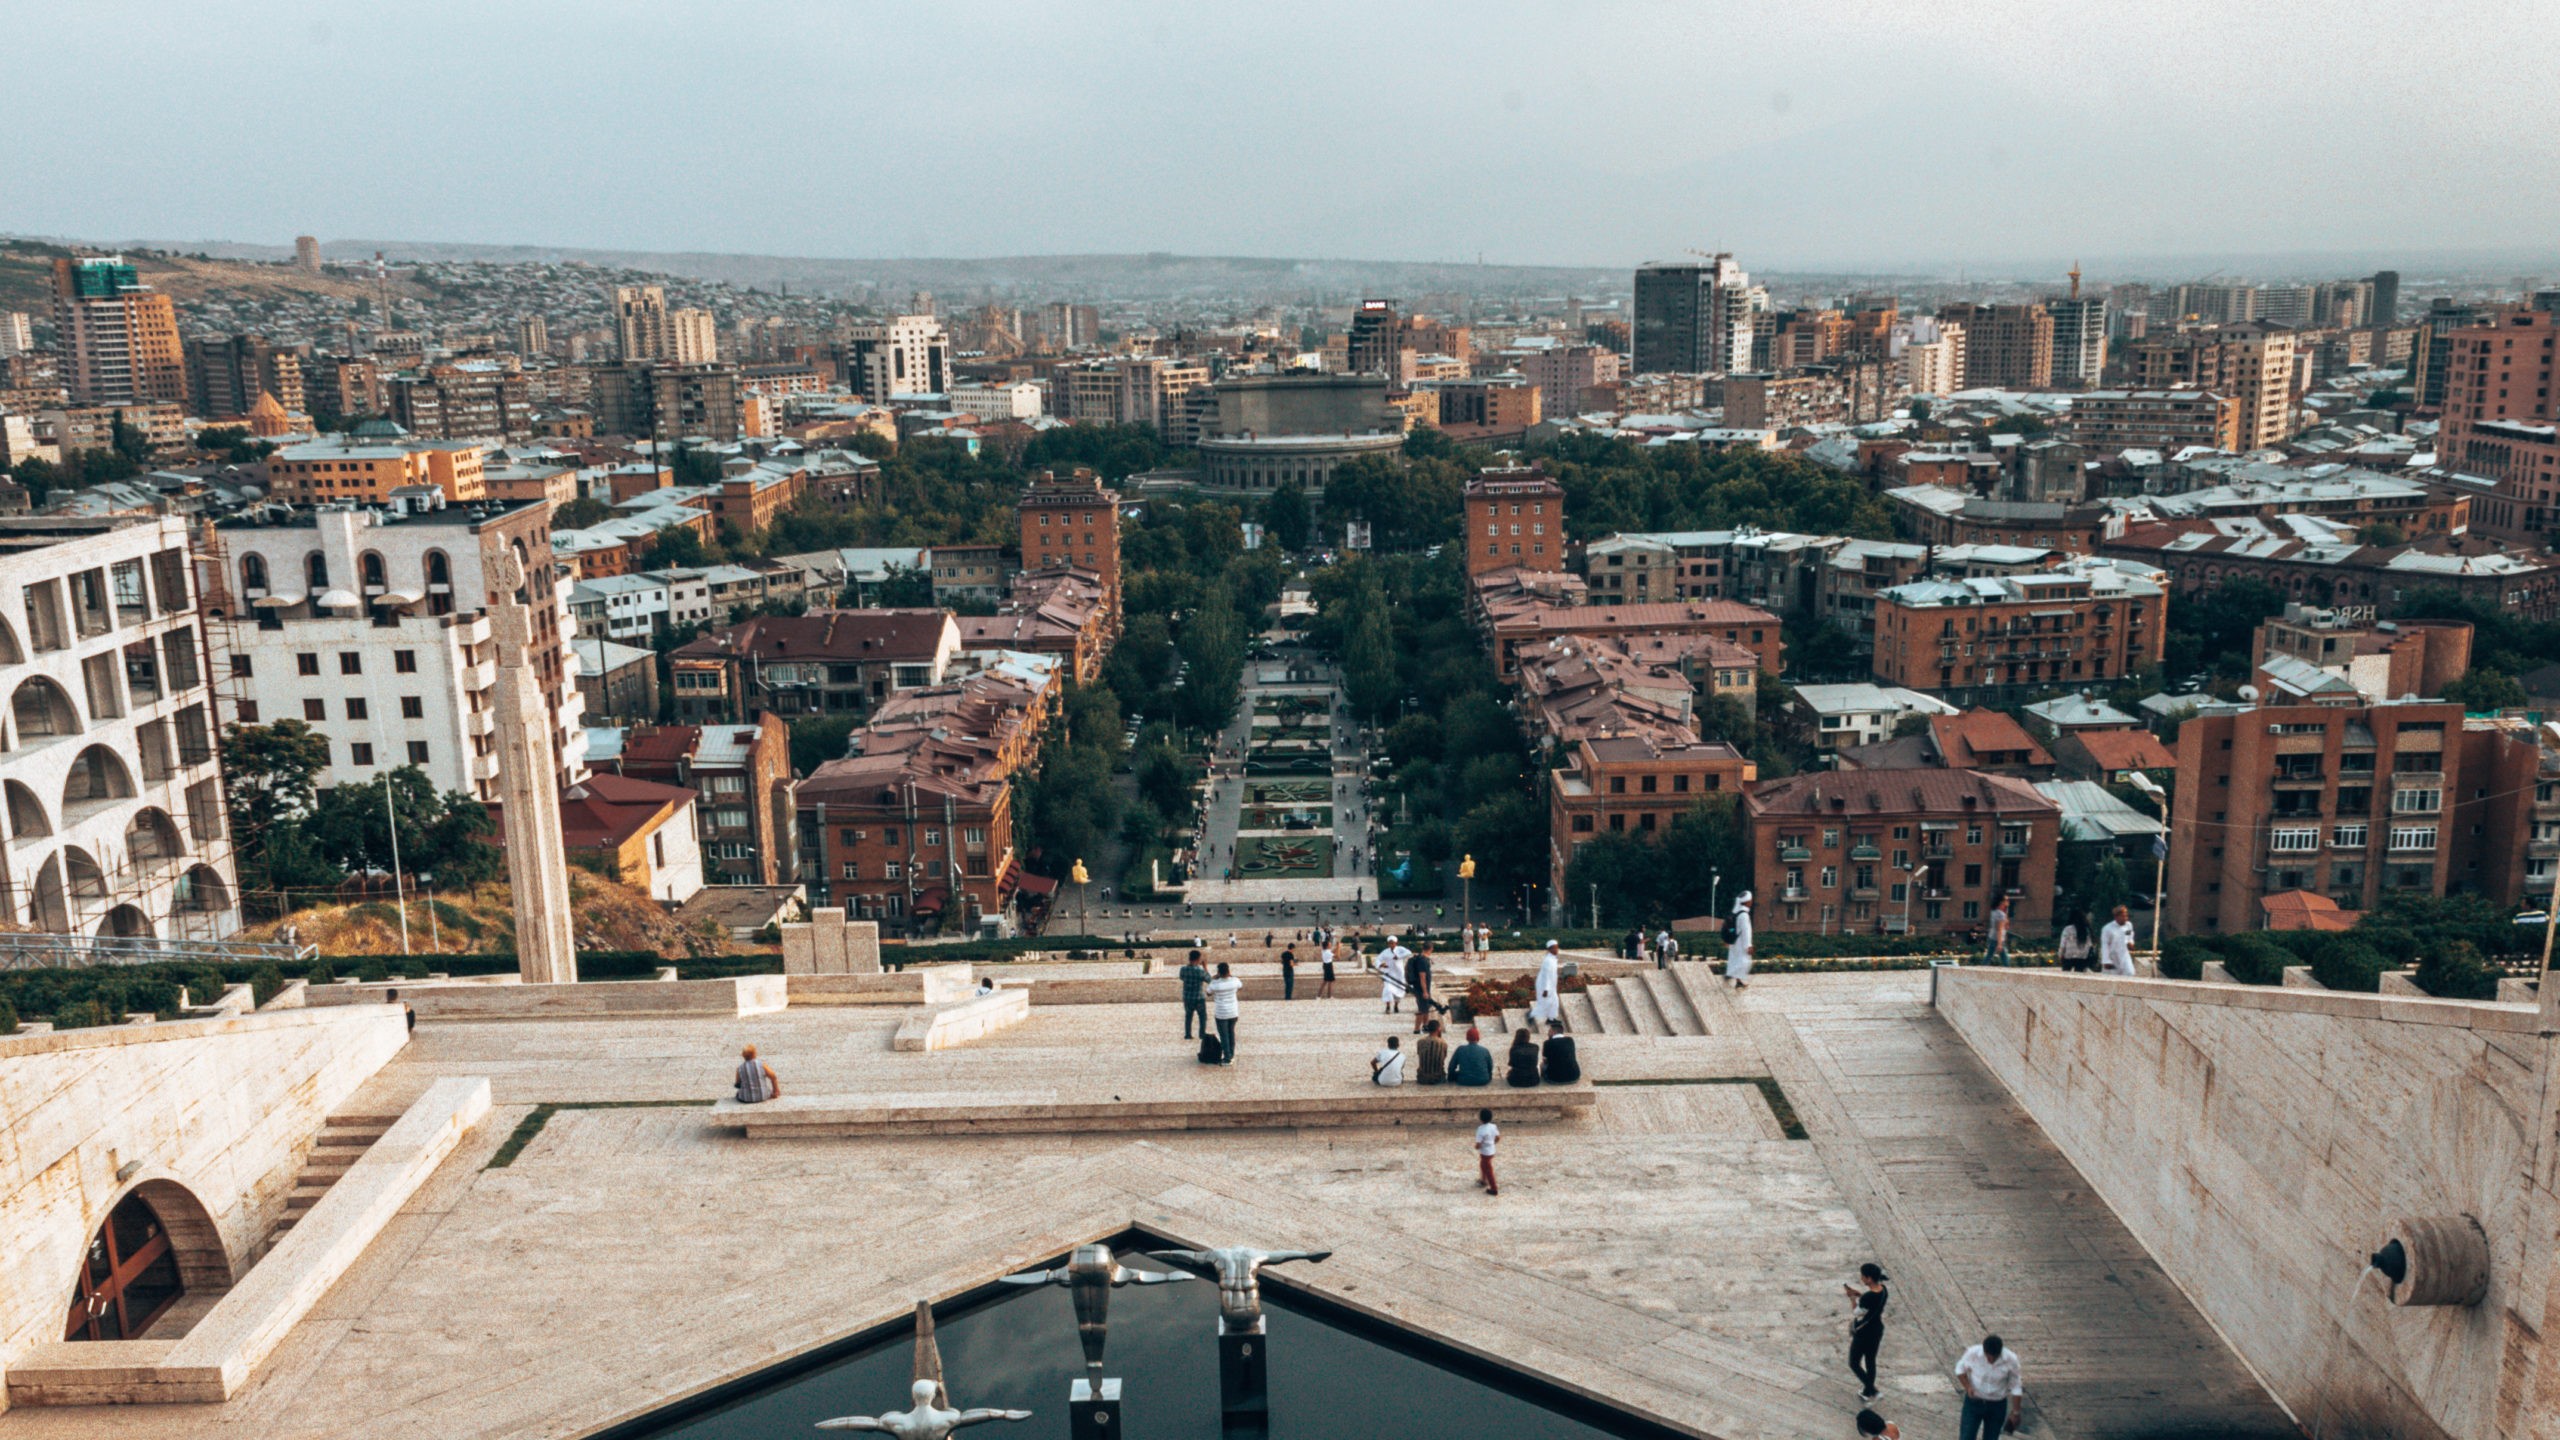 interesting places to visit in yerevan